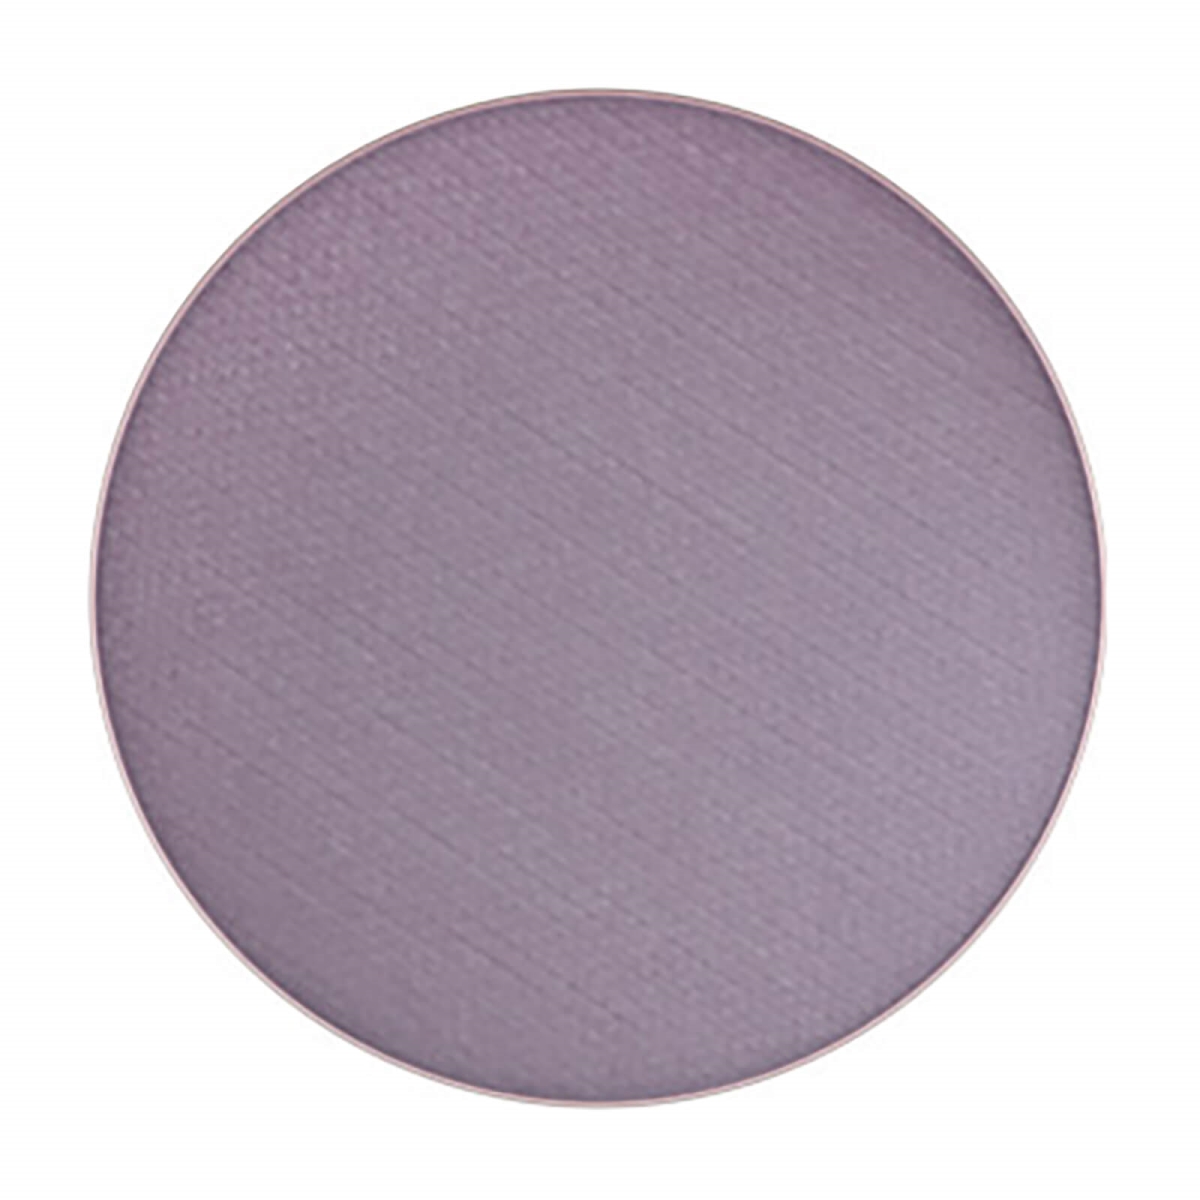 Picture of Mac 346386 0.04 oz Small Eye Shadow Refill Pan for Women, Scene